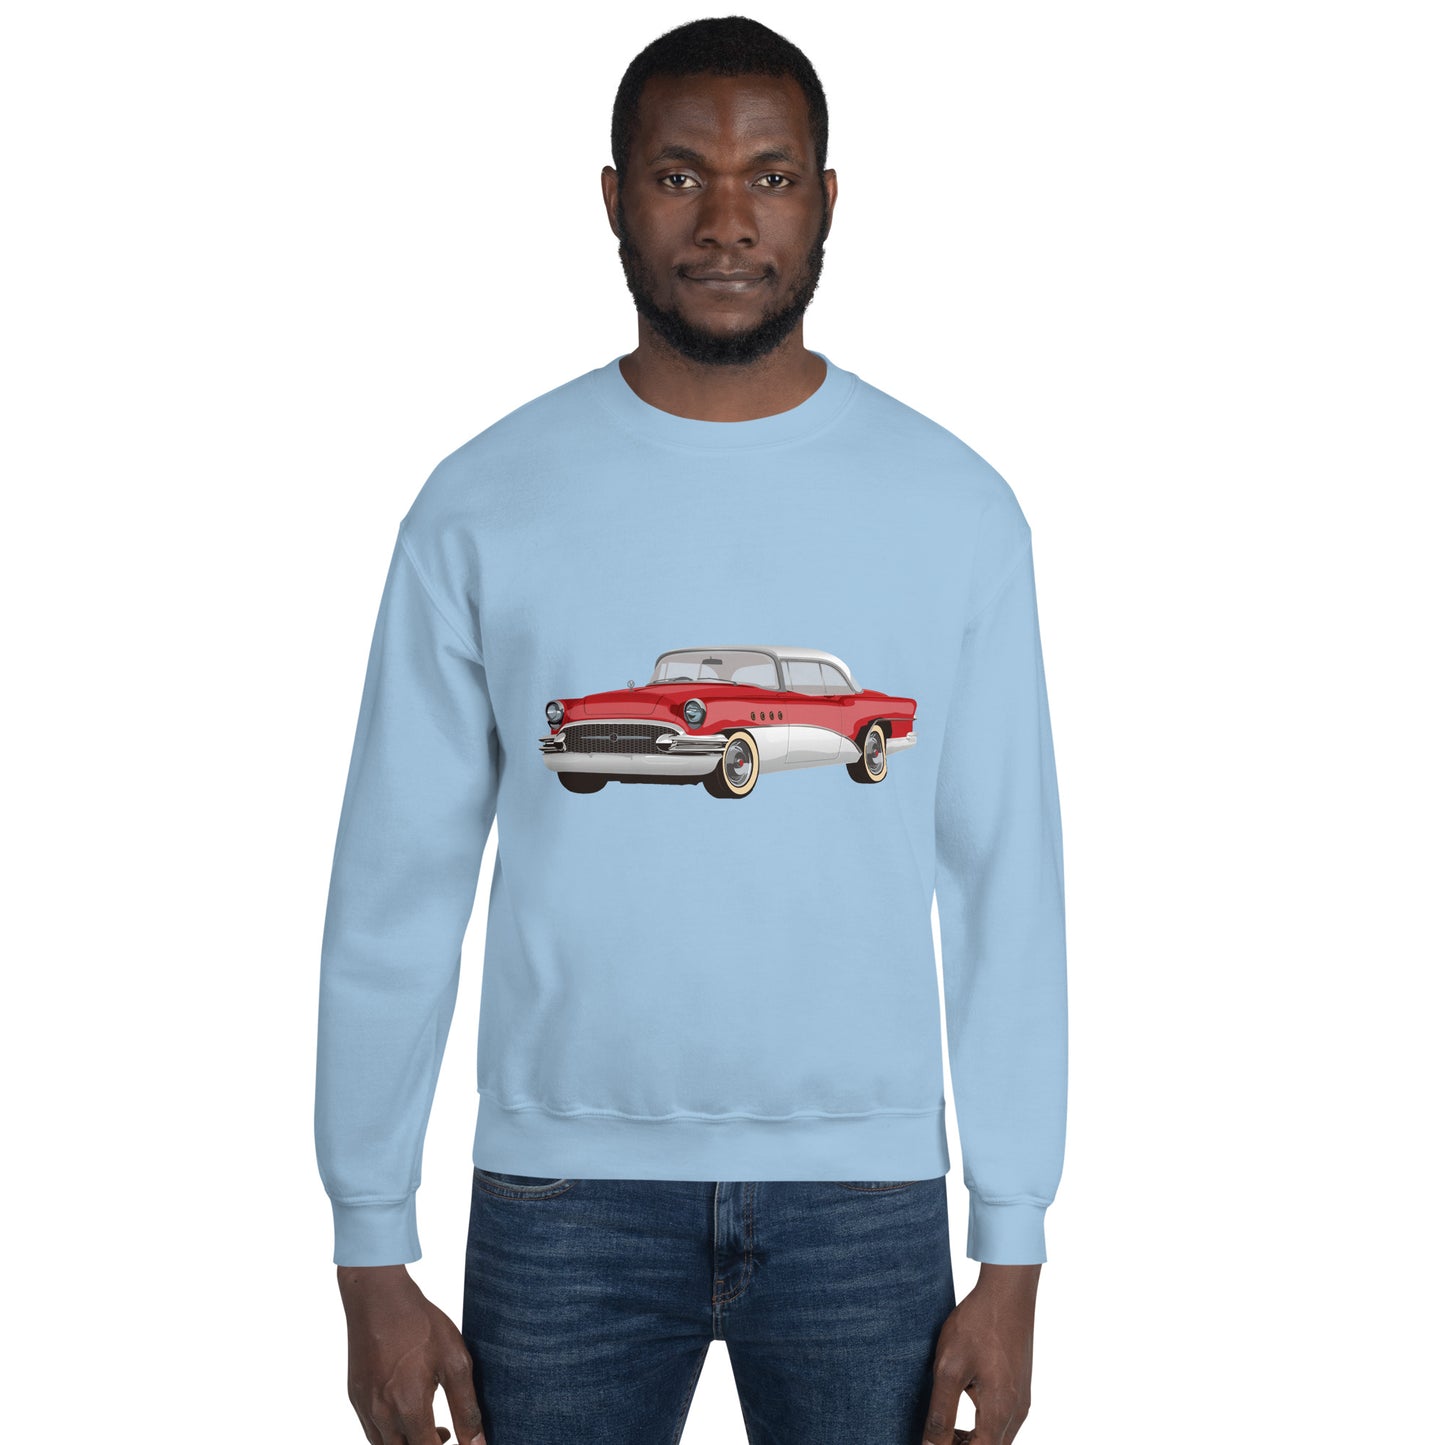 Man with light blue sweatshirt with red chevrolet